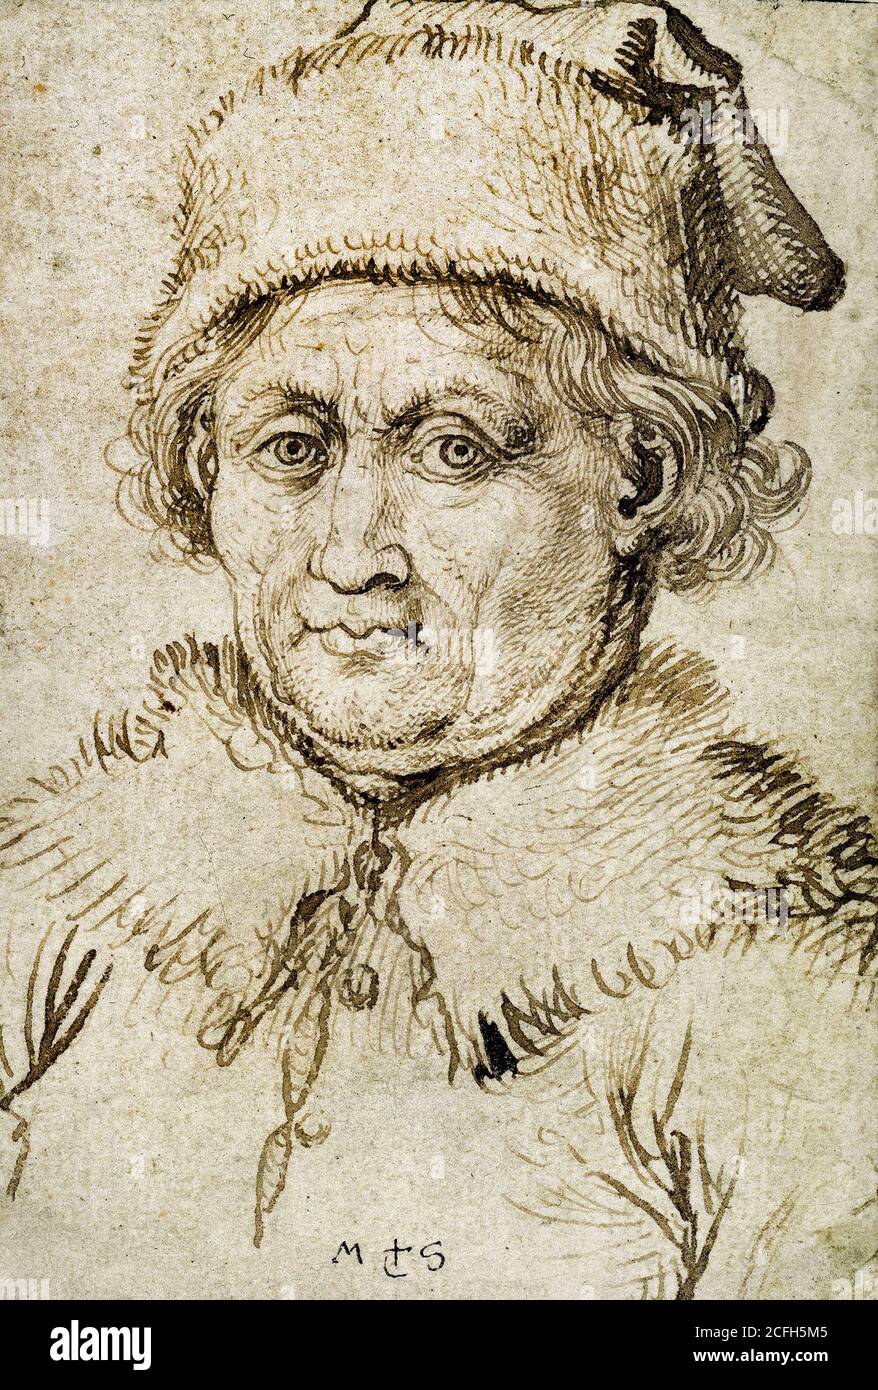 Martin Schongauer, Bust-length Image of an Old Man with Fur Collar and Hat, 1475, Pen and brown ink, Kupferstichkabinett Berlin, Germany Stock Photo